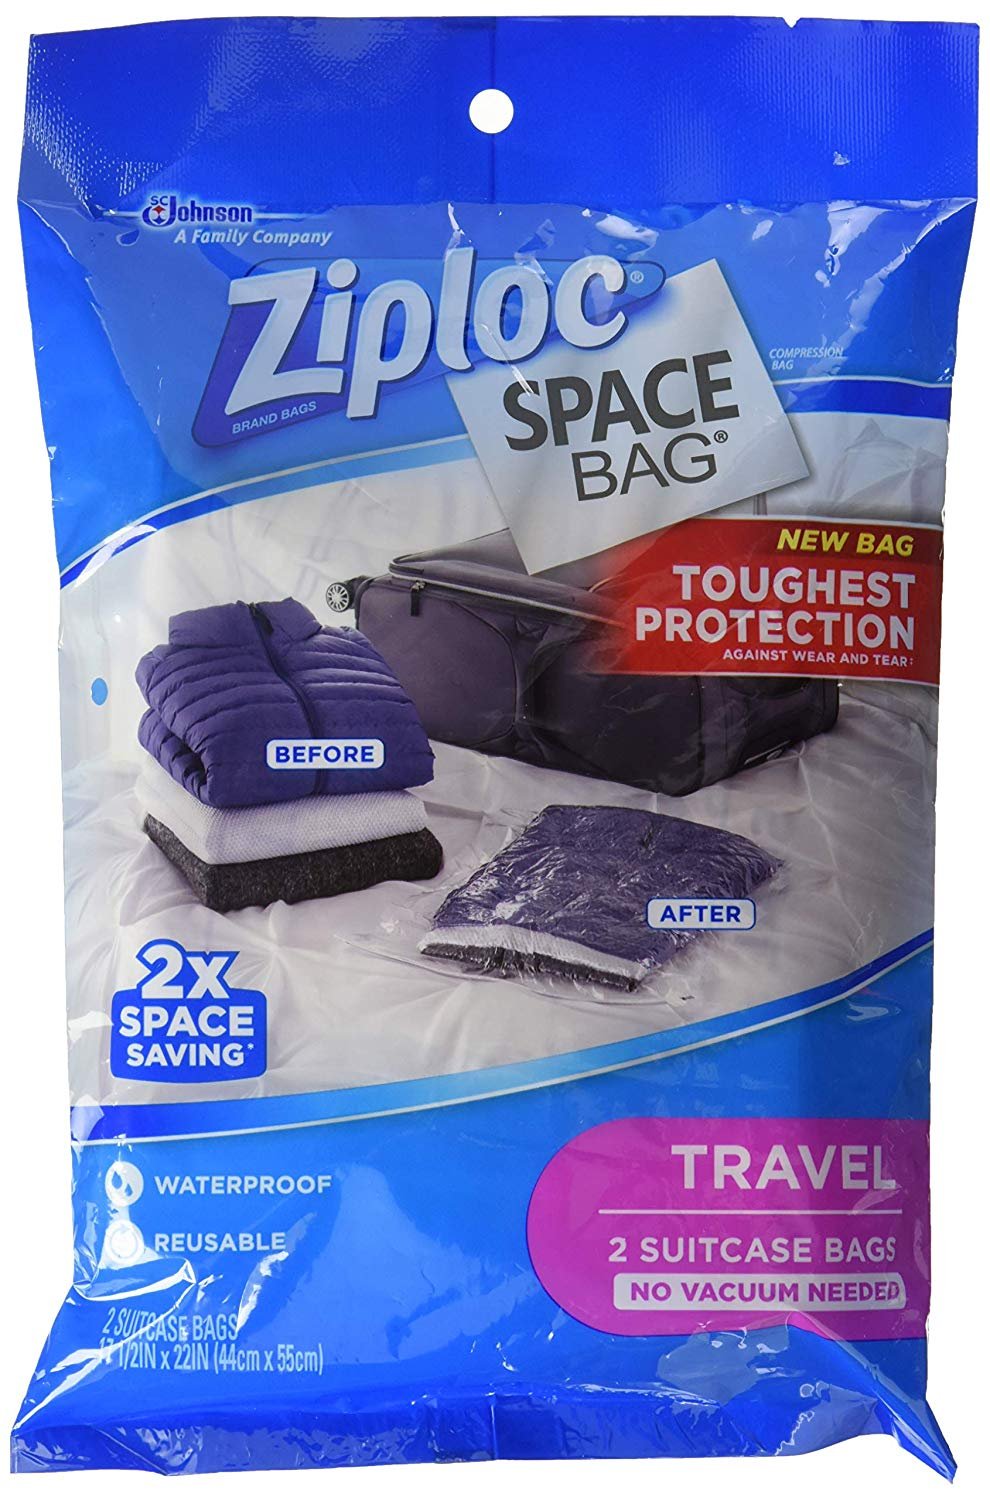 Ziploc Space Bag, Travel Bags - Poly Pack, 1 Pack - image 1 of 5